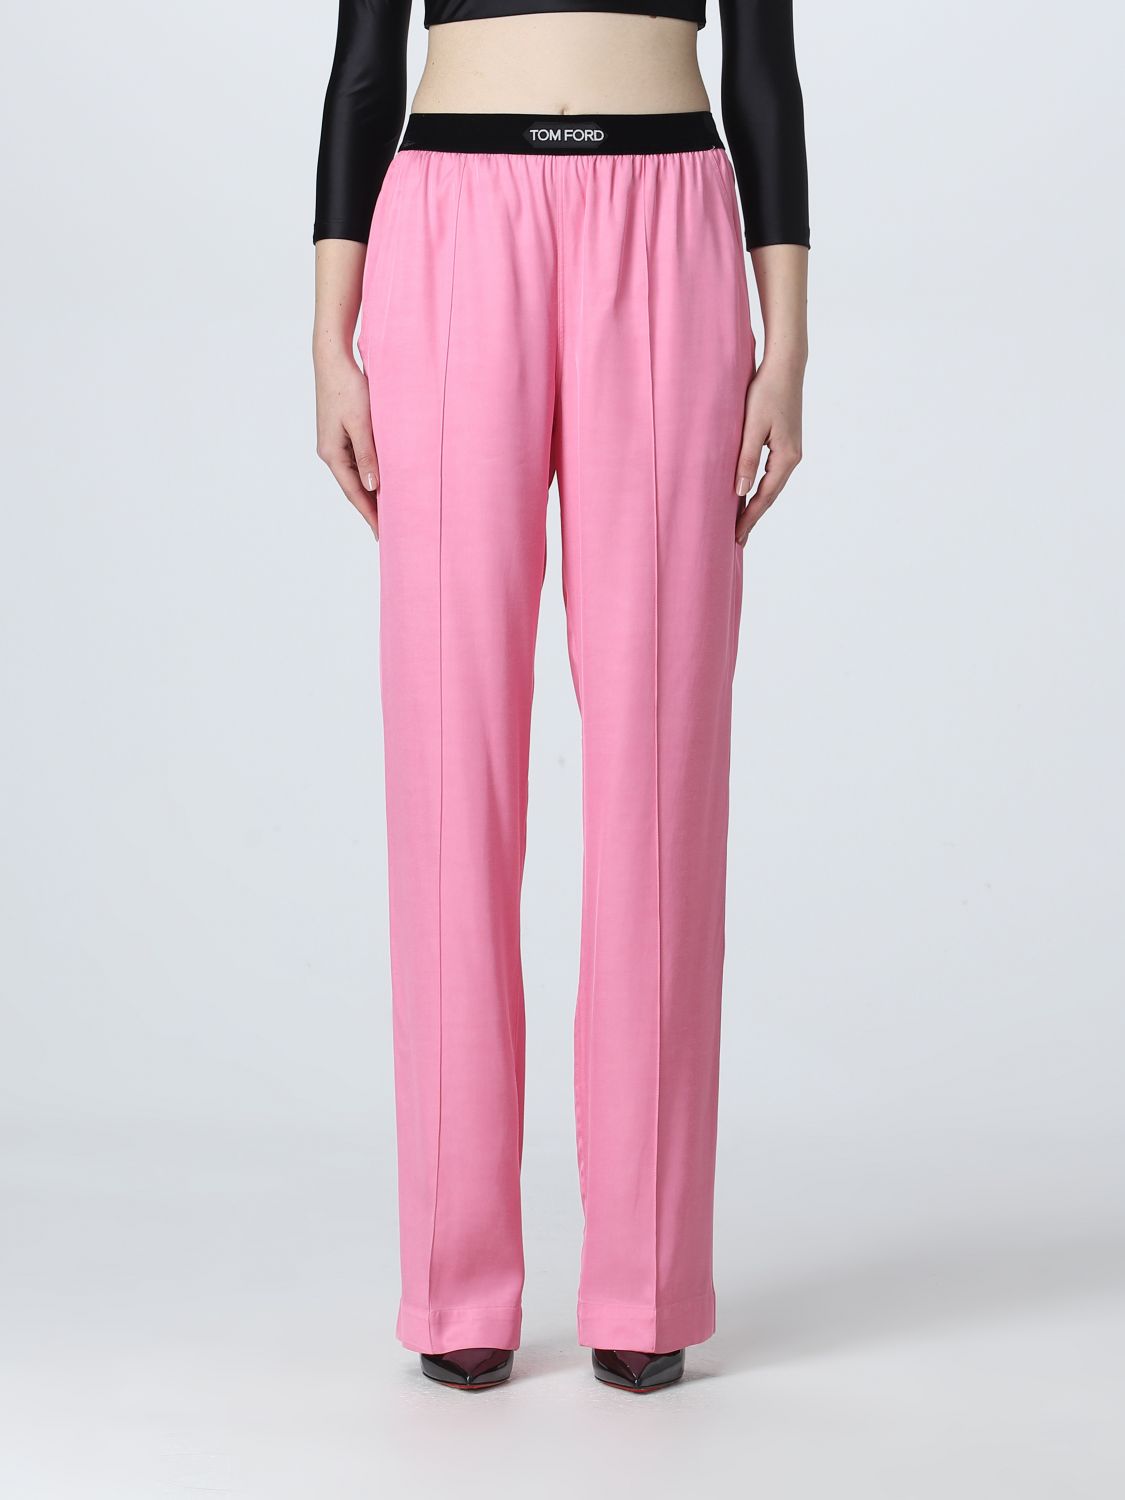 TOM FORD PANTS TOM FORD WOMAN COLOR PINK,E17972010